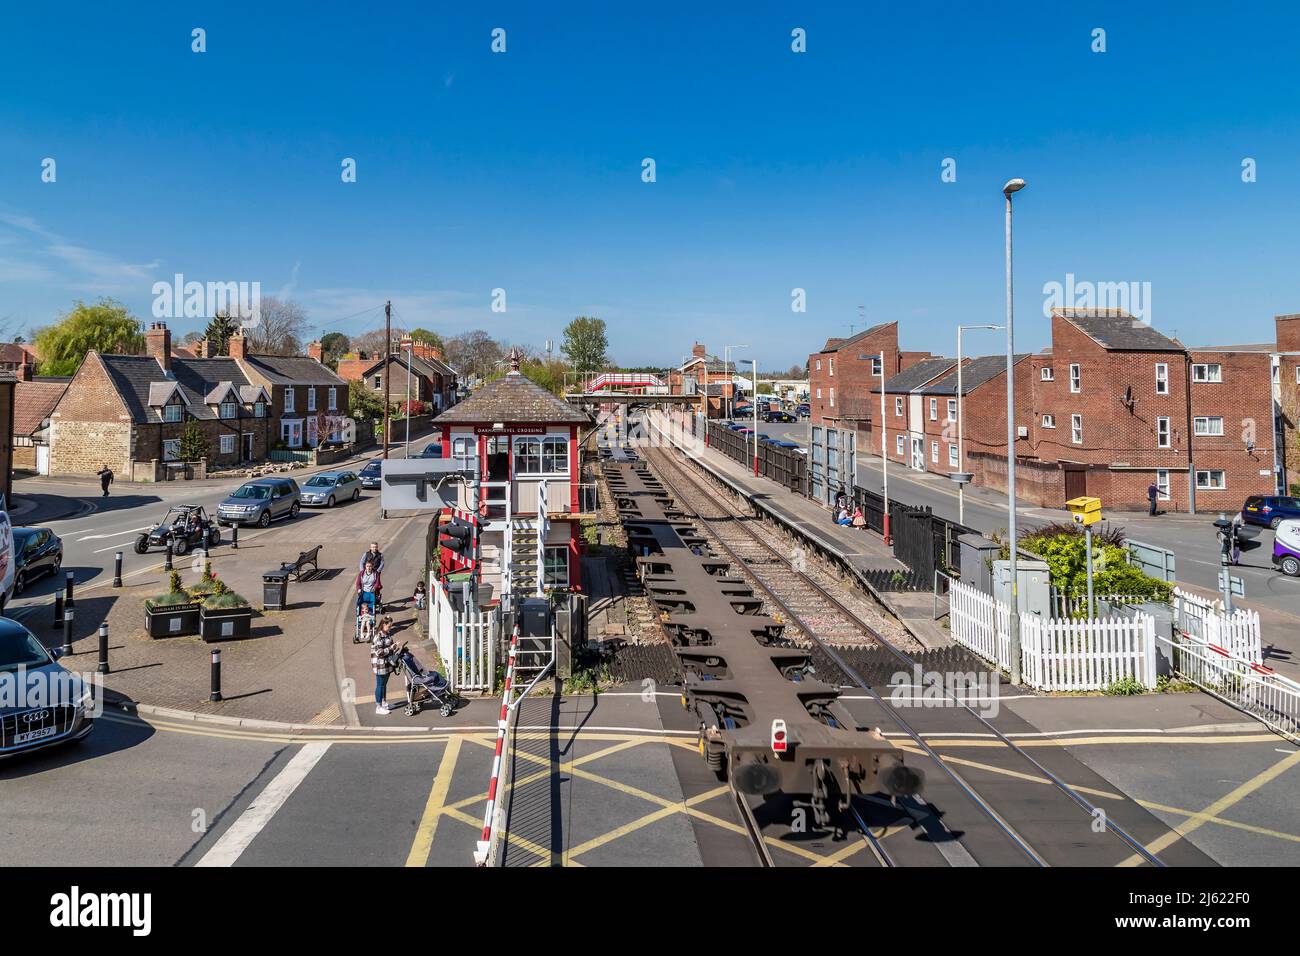 Container train going through Oakham station on a  afternoon, looking down from the foot bridge over the tracks, Rutland, Leicester, England, UK. Stock Photo